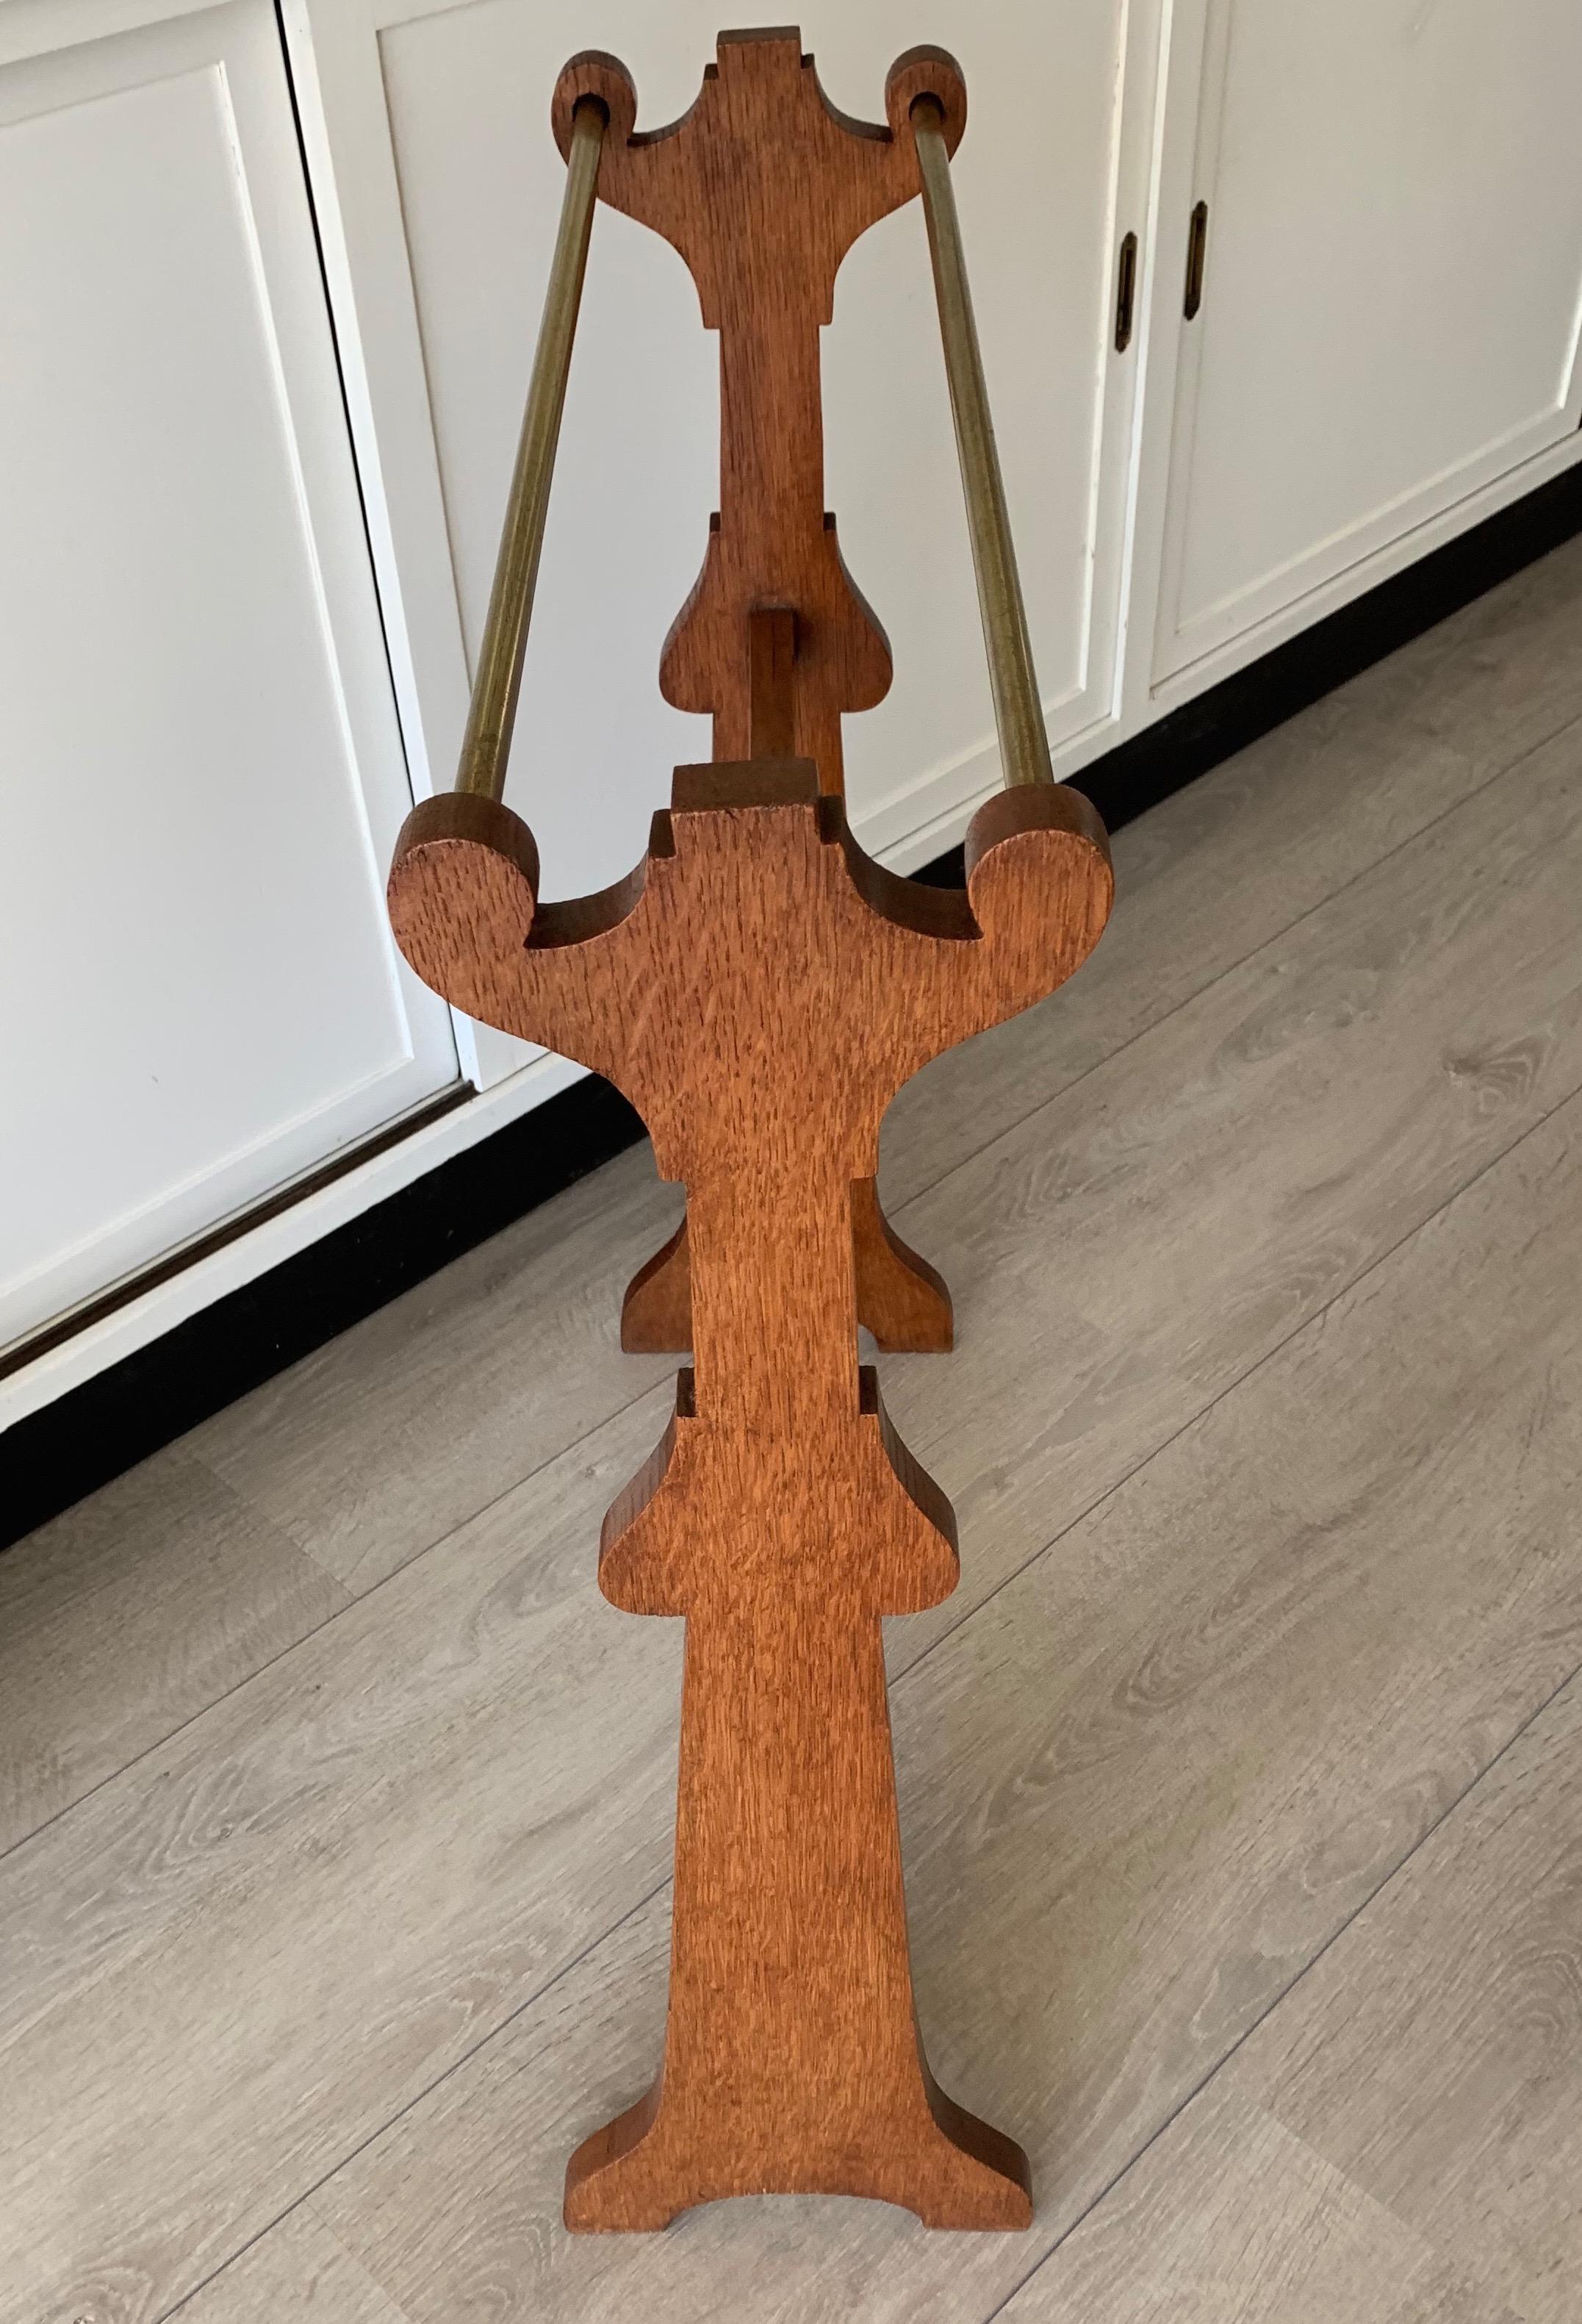 Excellent Shape and Condition Elegant and one of a kind towel rack from the early 1900s.

This handcrafted, solid oak towel rack comes with circular brass rods for hanging your towels on. It is in perfect condition and thanks to its design, this